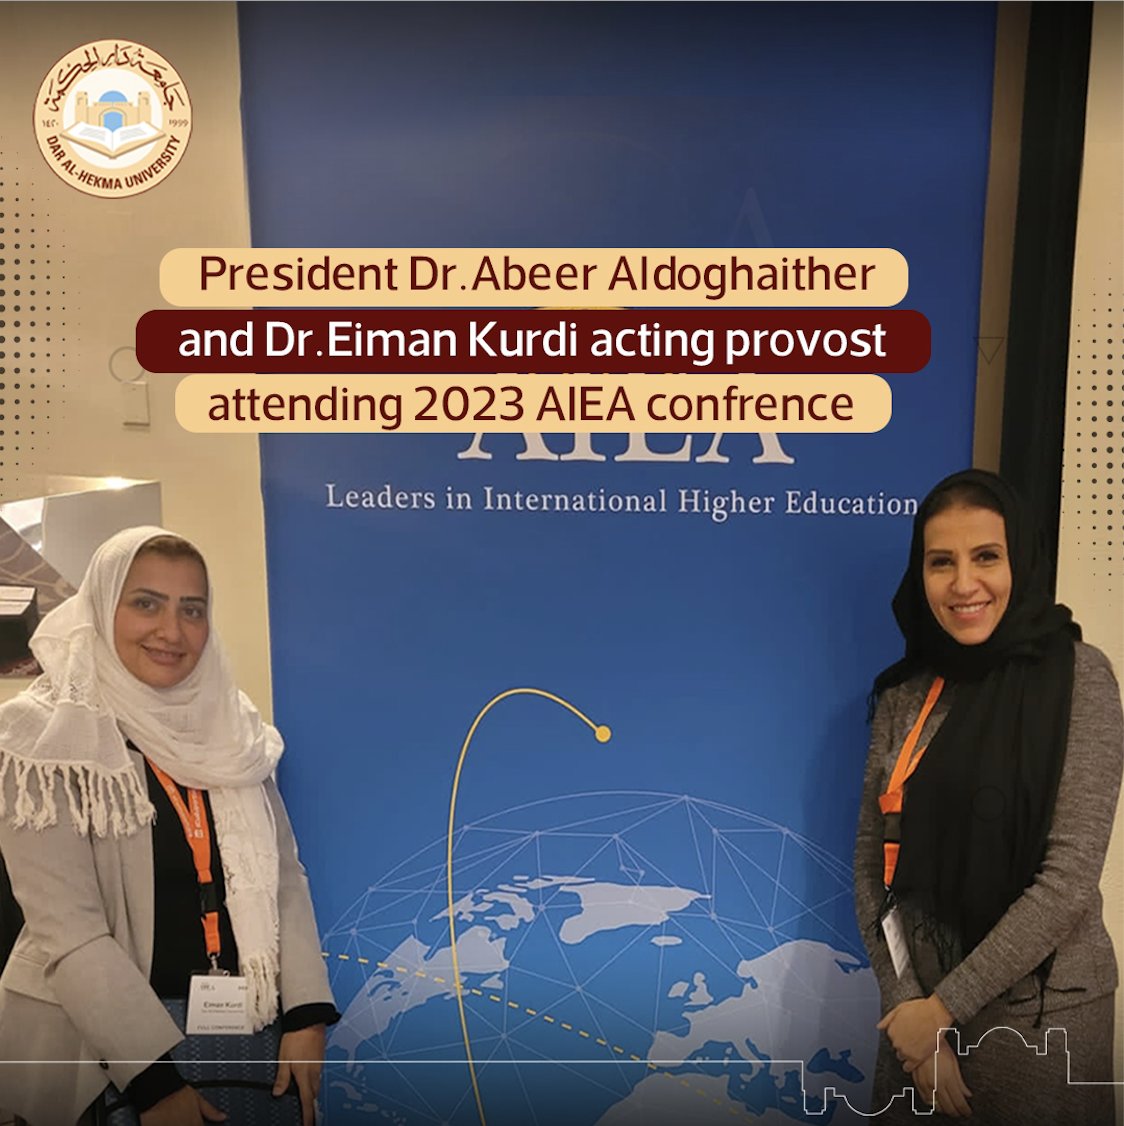 Dr. Abeer Aldoghaither, President and Dr. Eiman Kurdi, acting Provost attending 2023 AIEA conference where international education leaders meet from all over the globe

#DAHuniversity #CIES2023 #virtualexchange #intled #AIEA2023